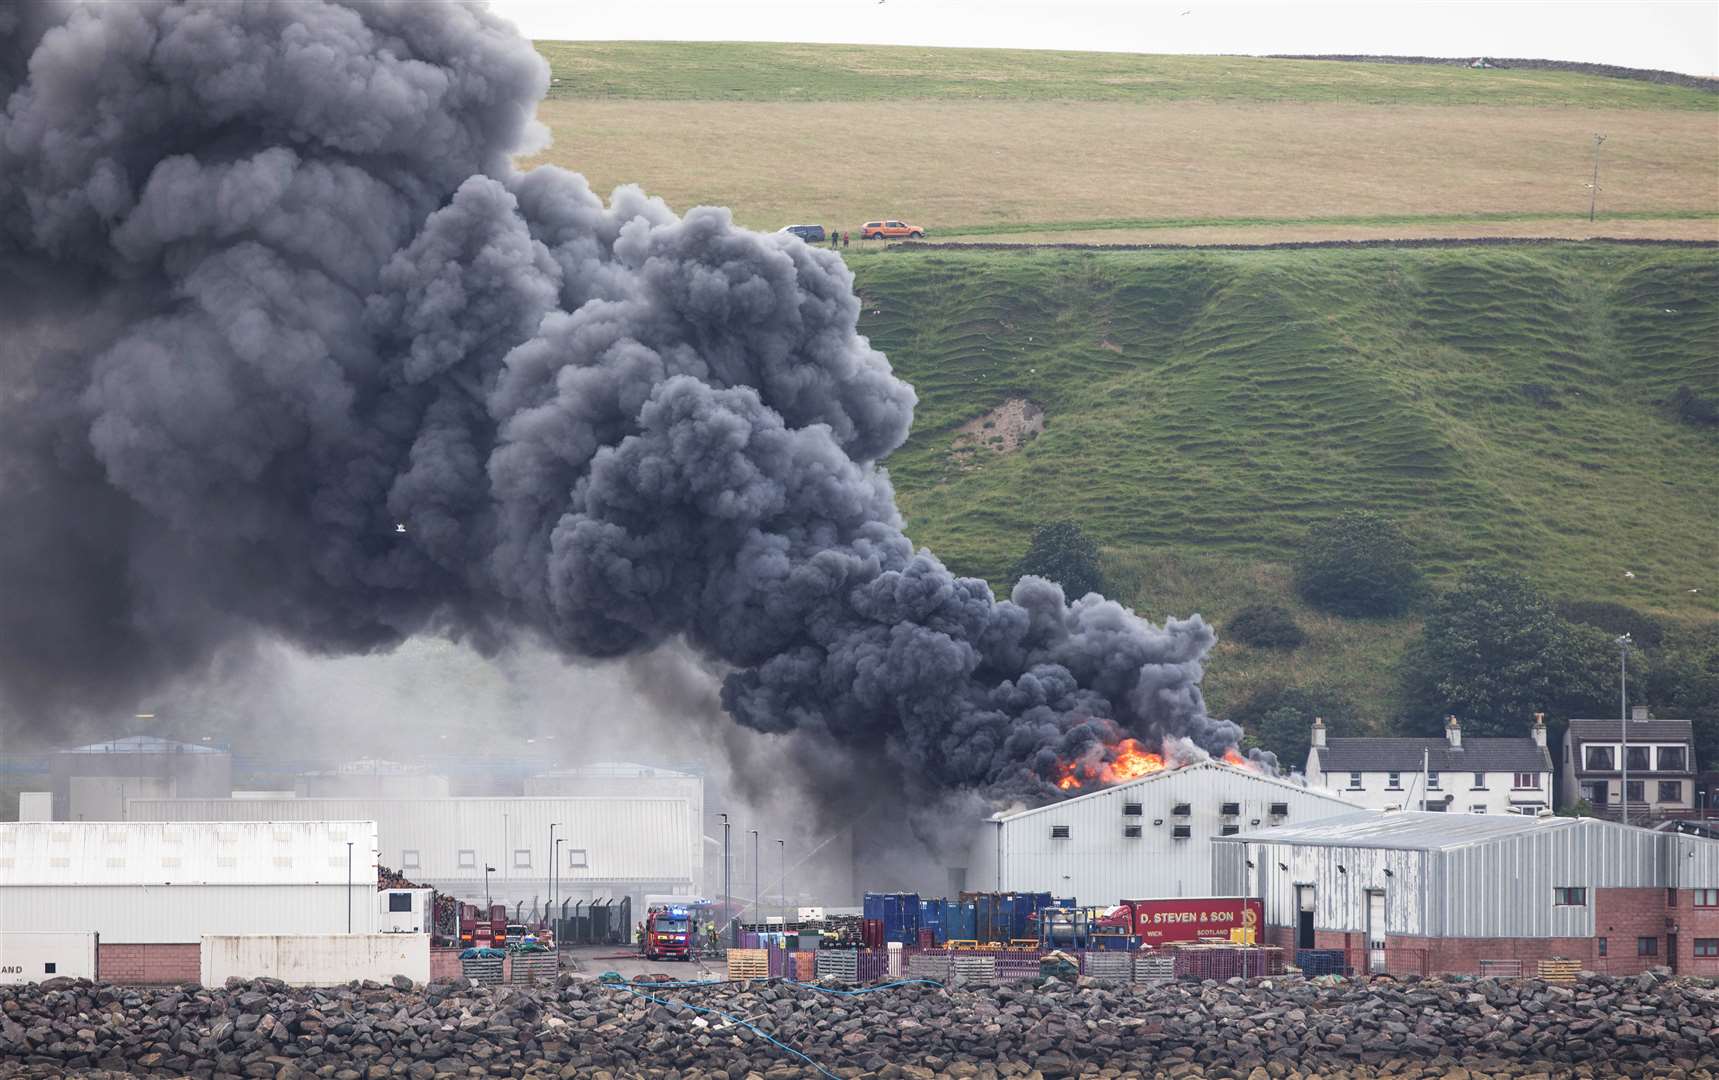 Thick black smoke billowing from Scrabster Seafoods on Sunday evening. Picture: Karen Munro